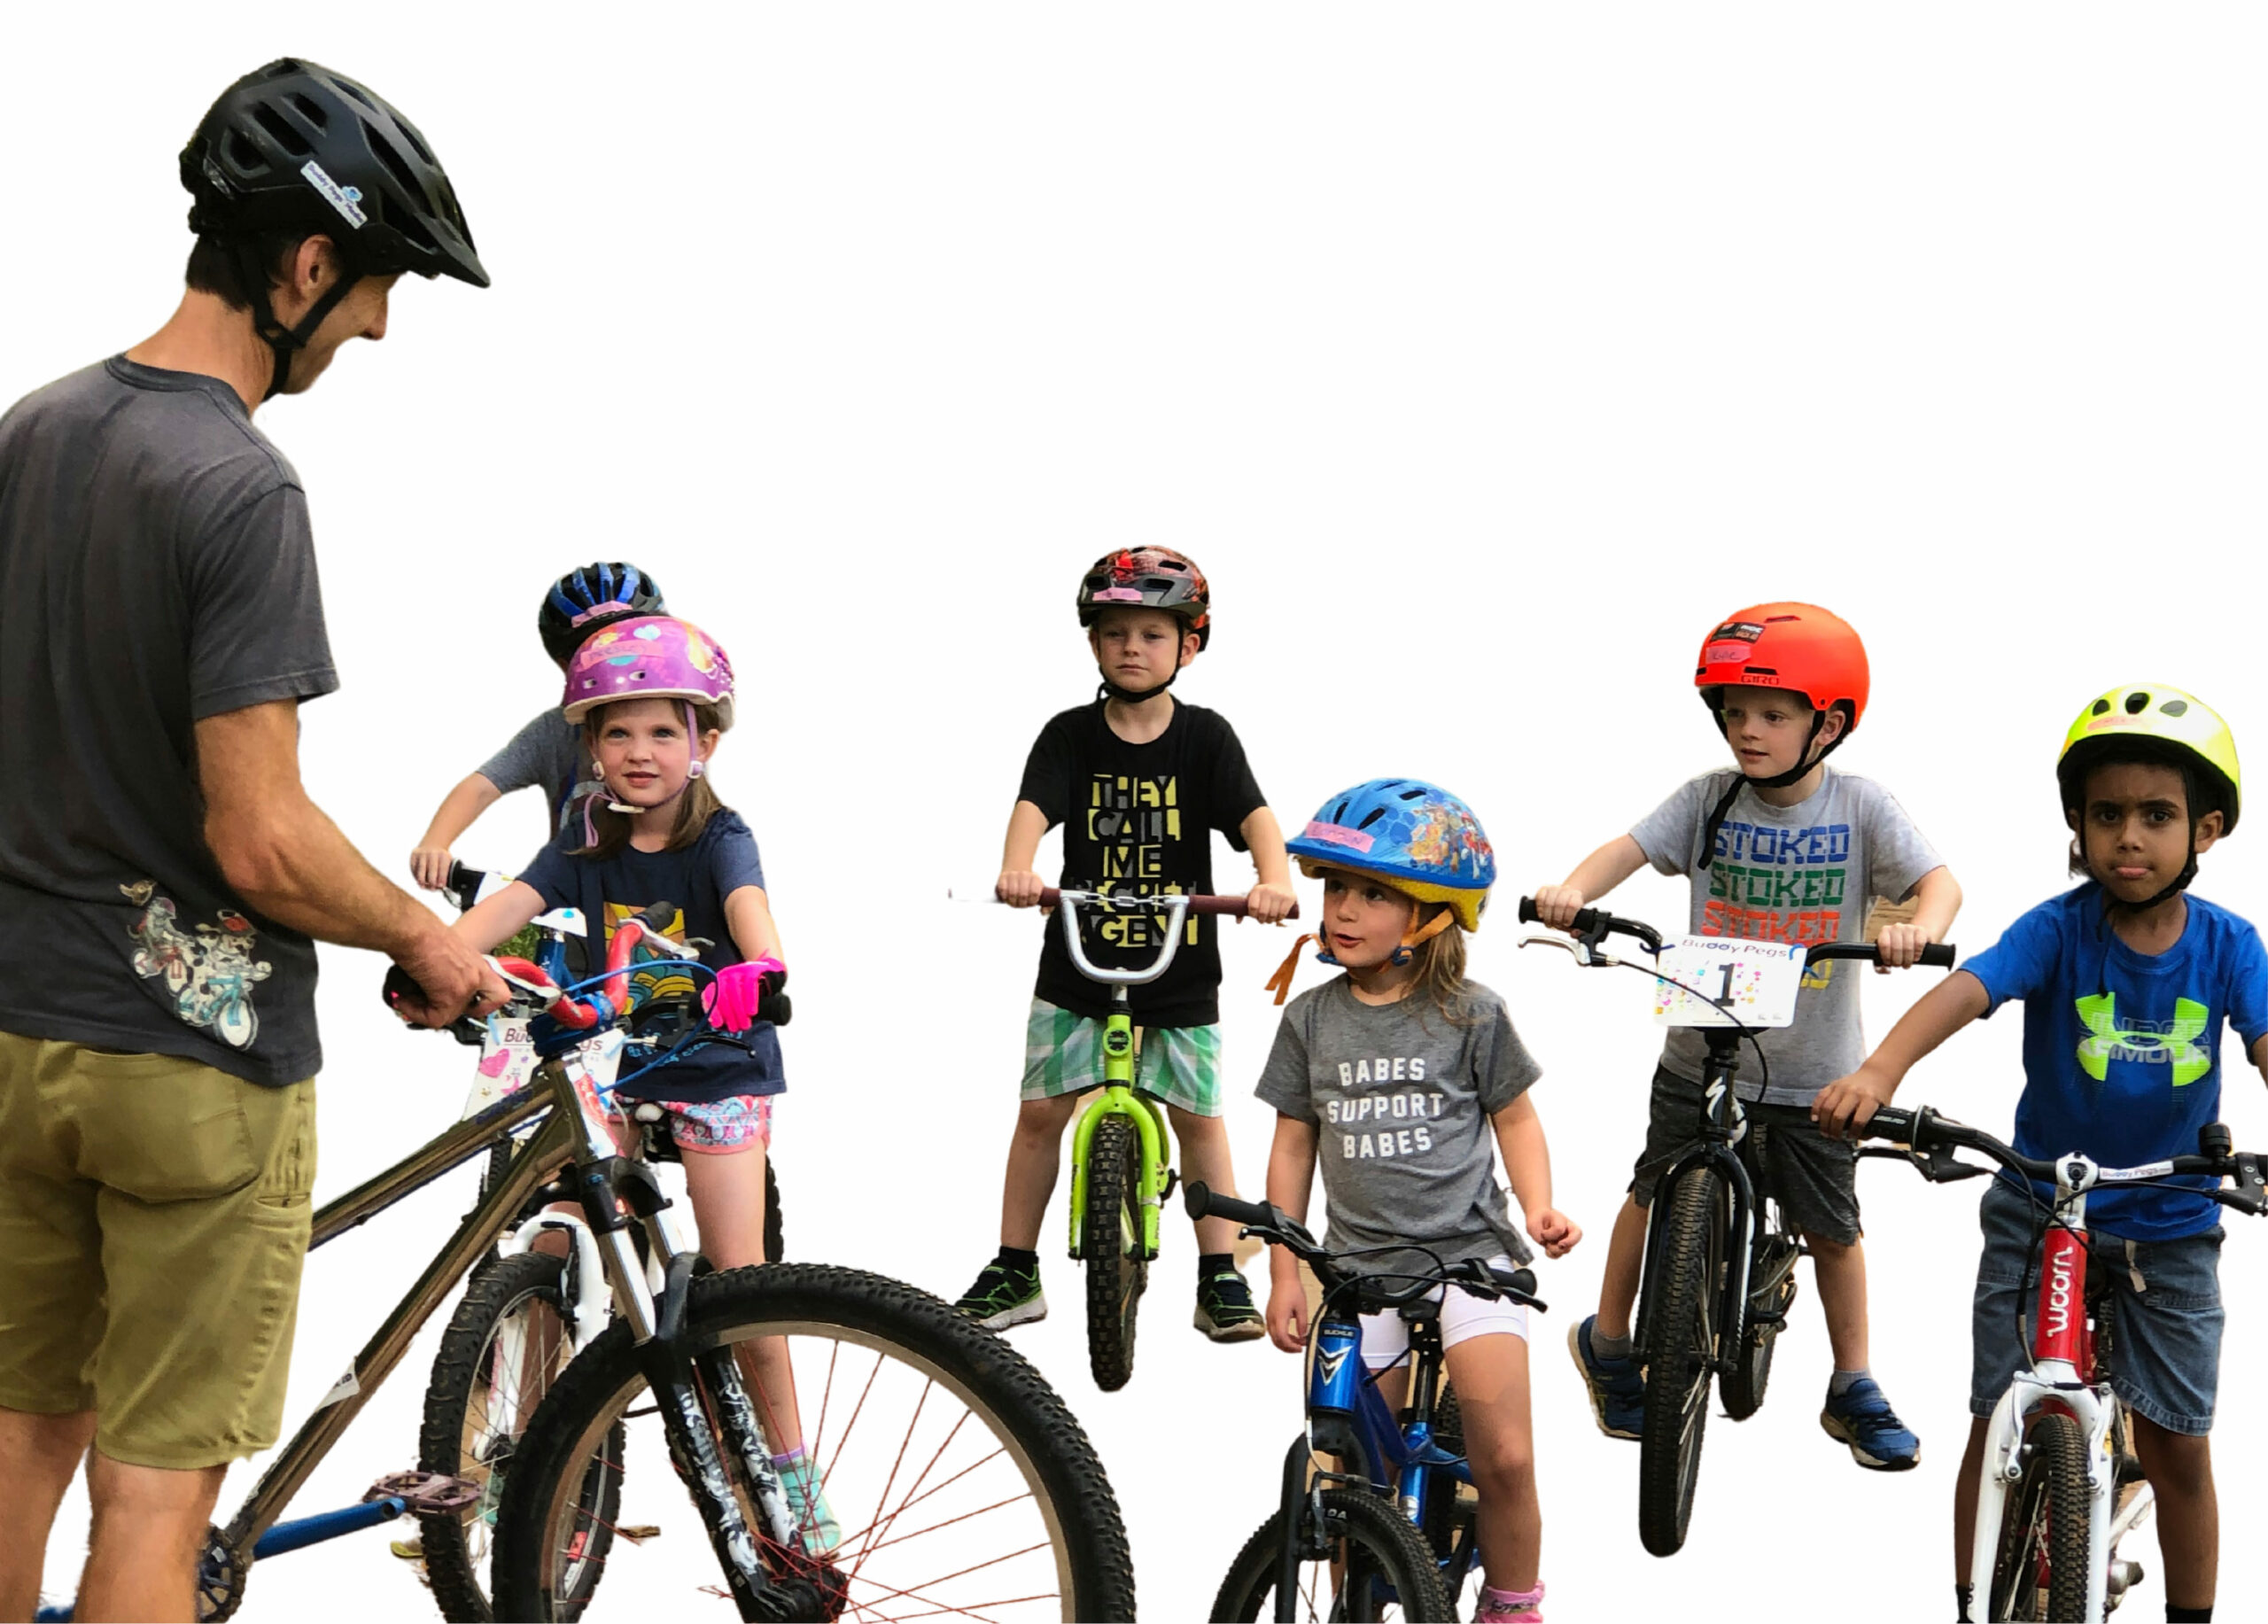 Bike coach with young children on bikes in a bike class